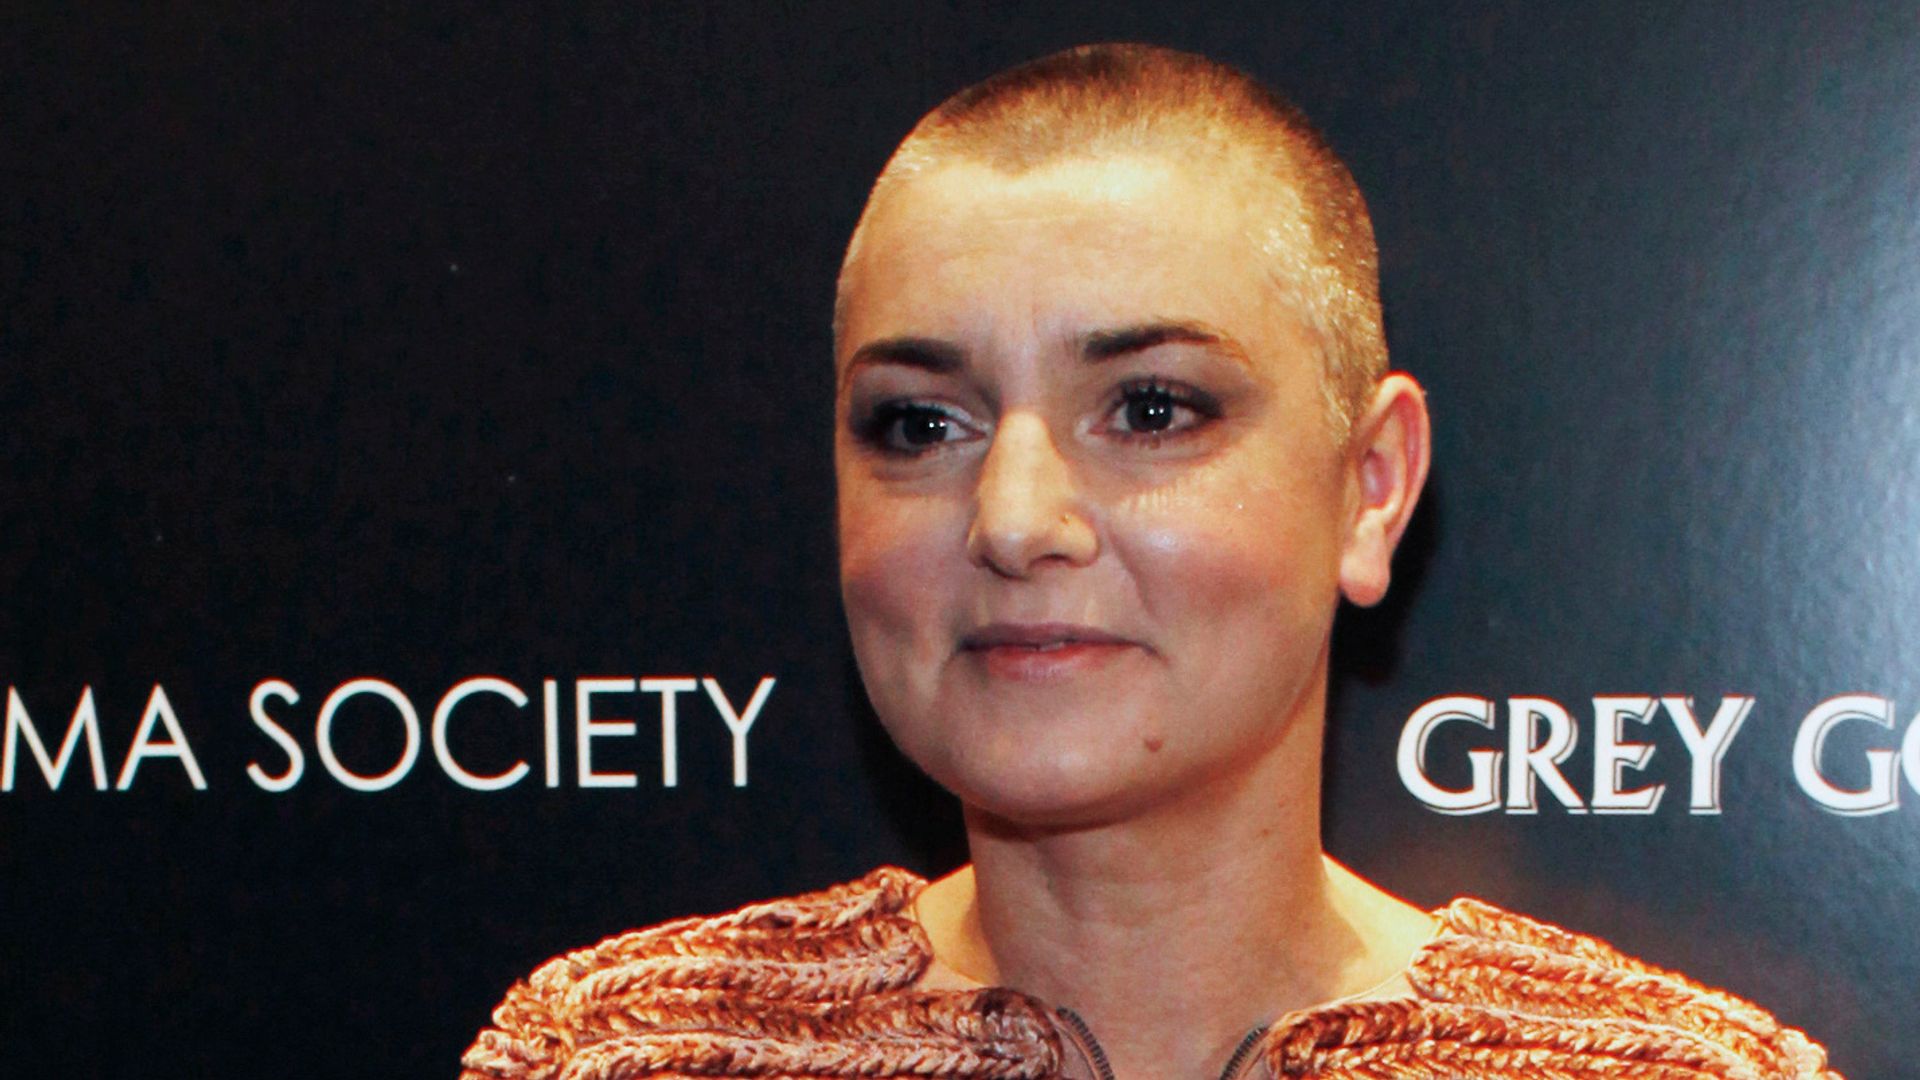 'Hideous' wax replica of Sinead O'Connor withdrawn by museum